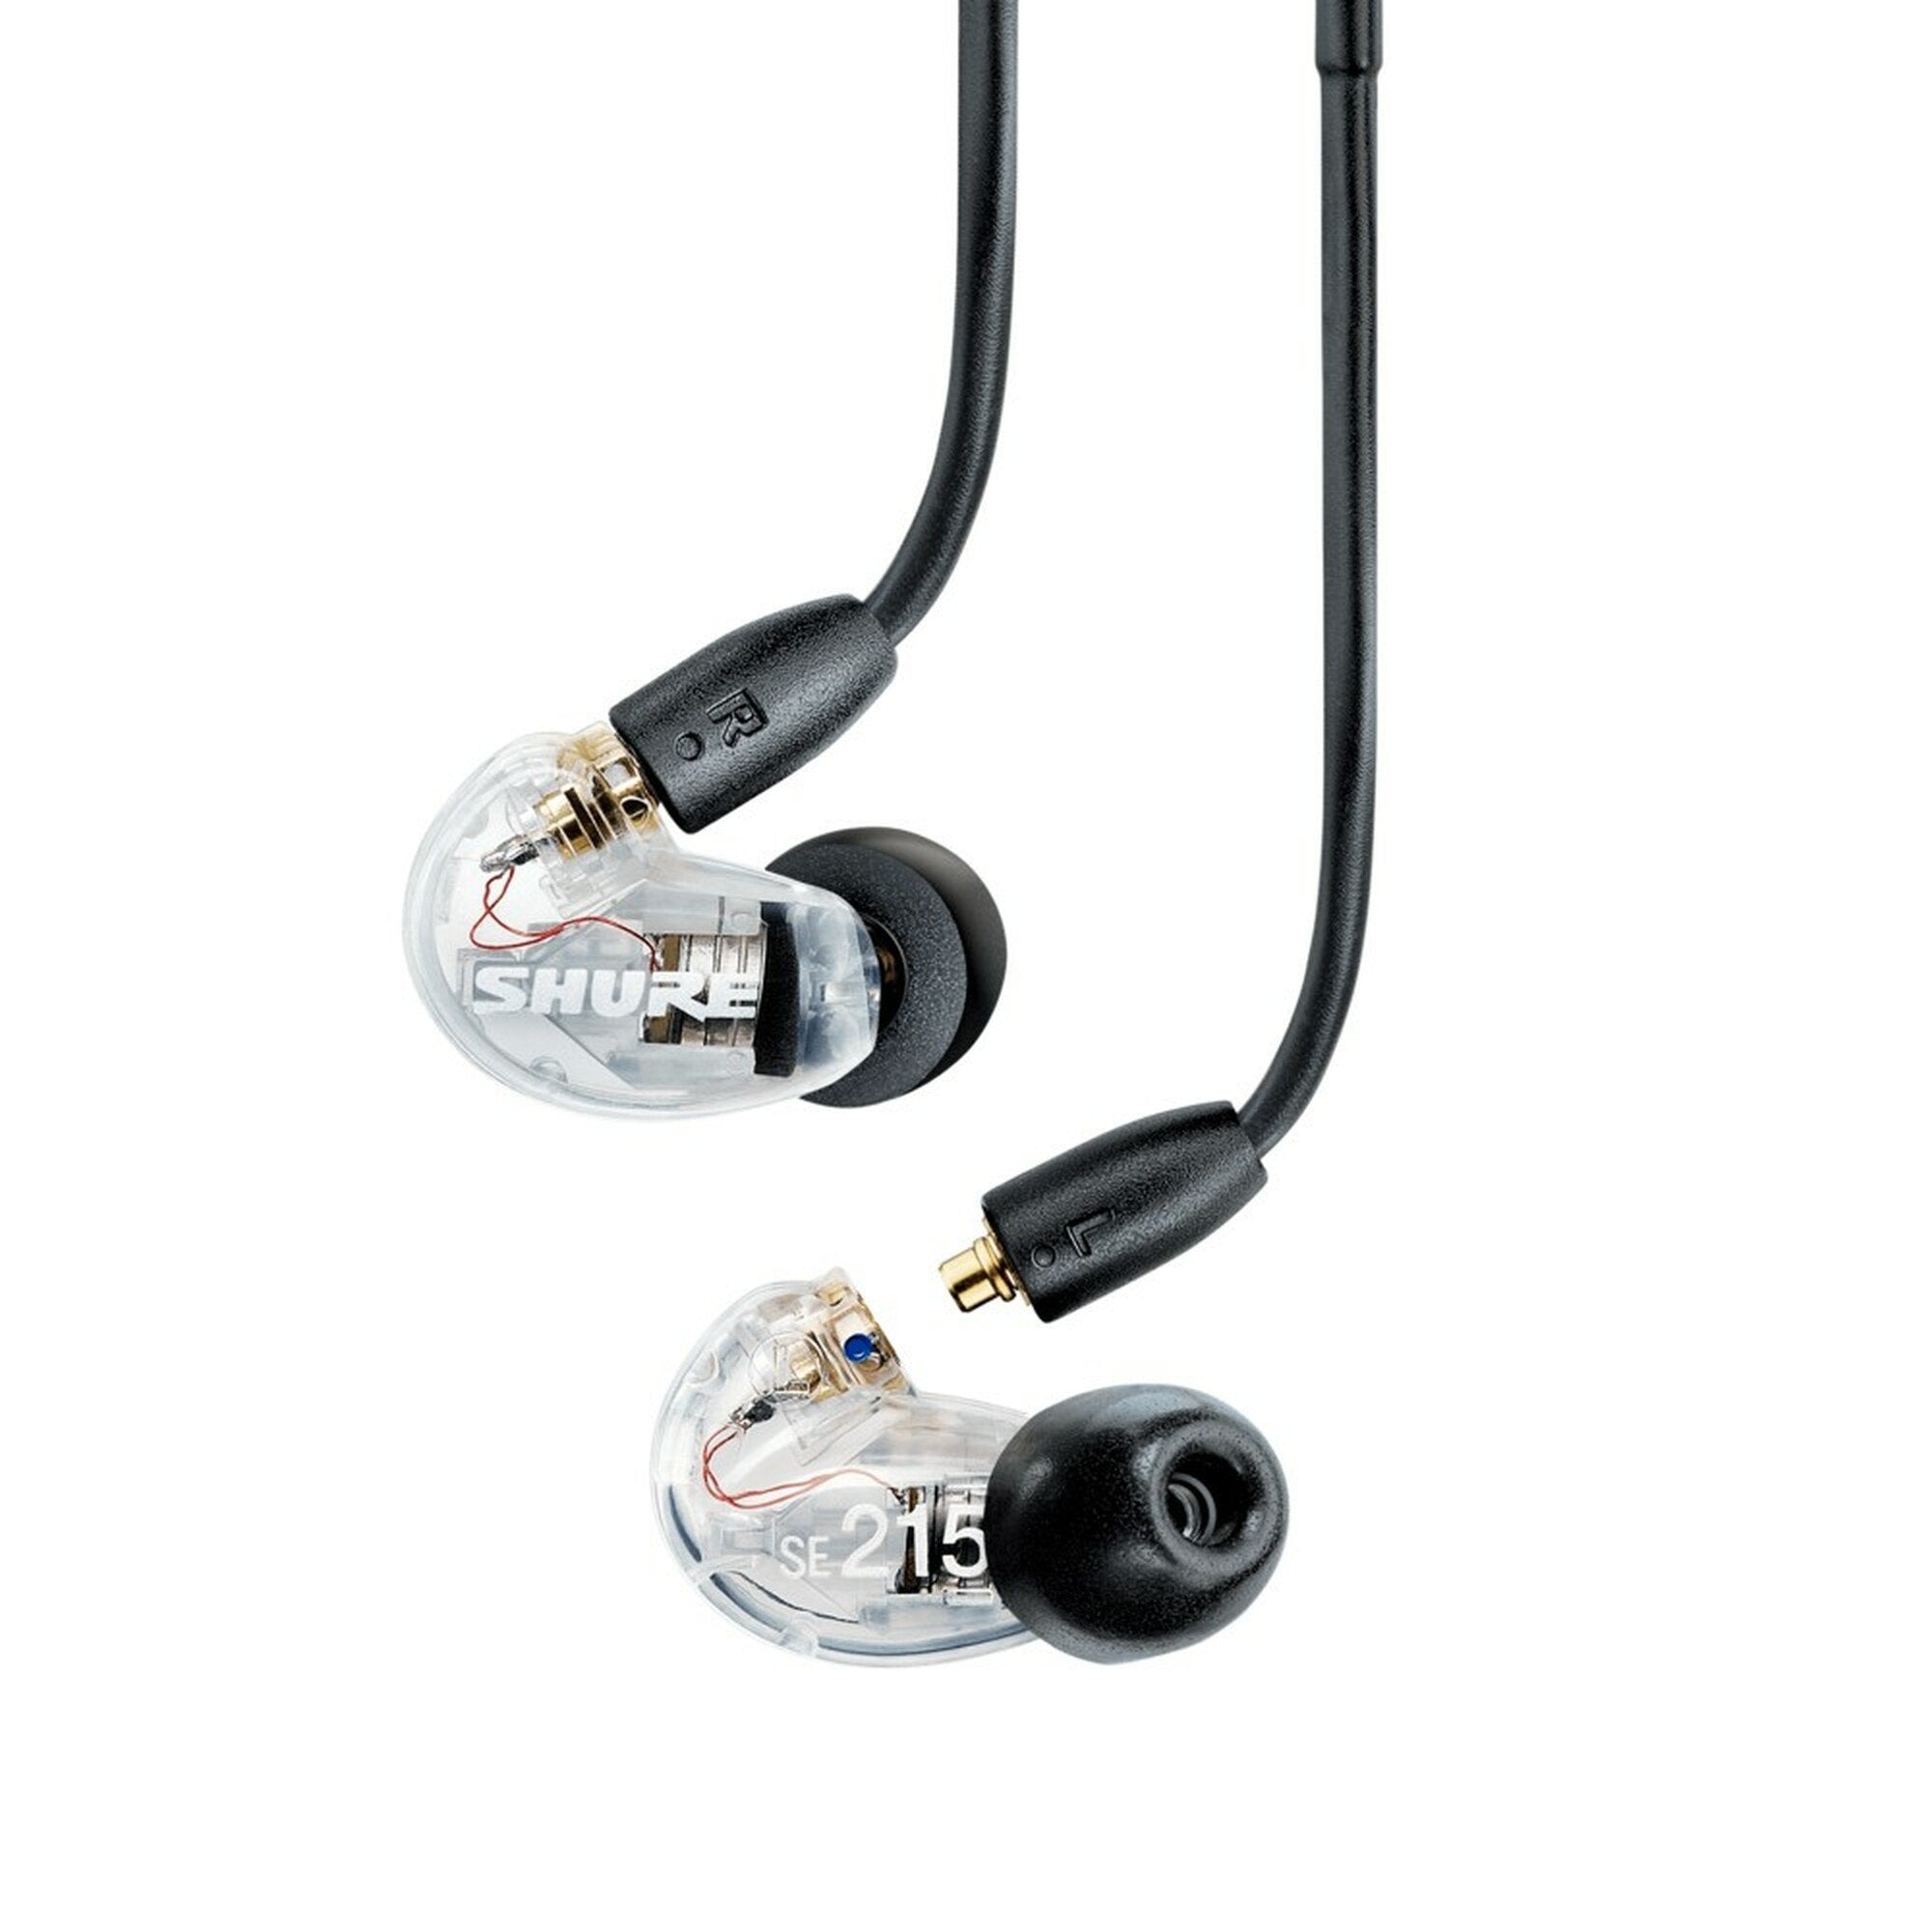 Shure Aonic 215 - In-Ear Monitor Earphones with Remote Control and Microphone